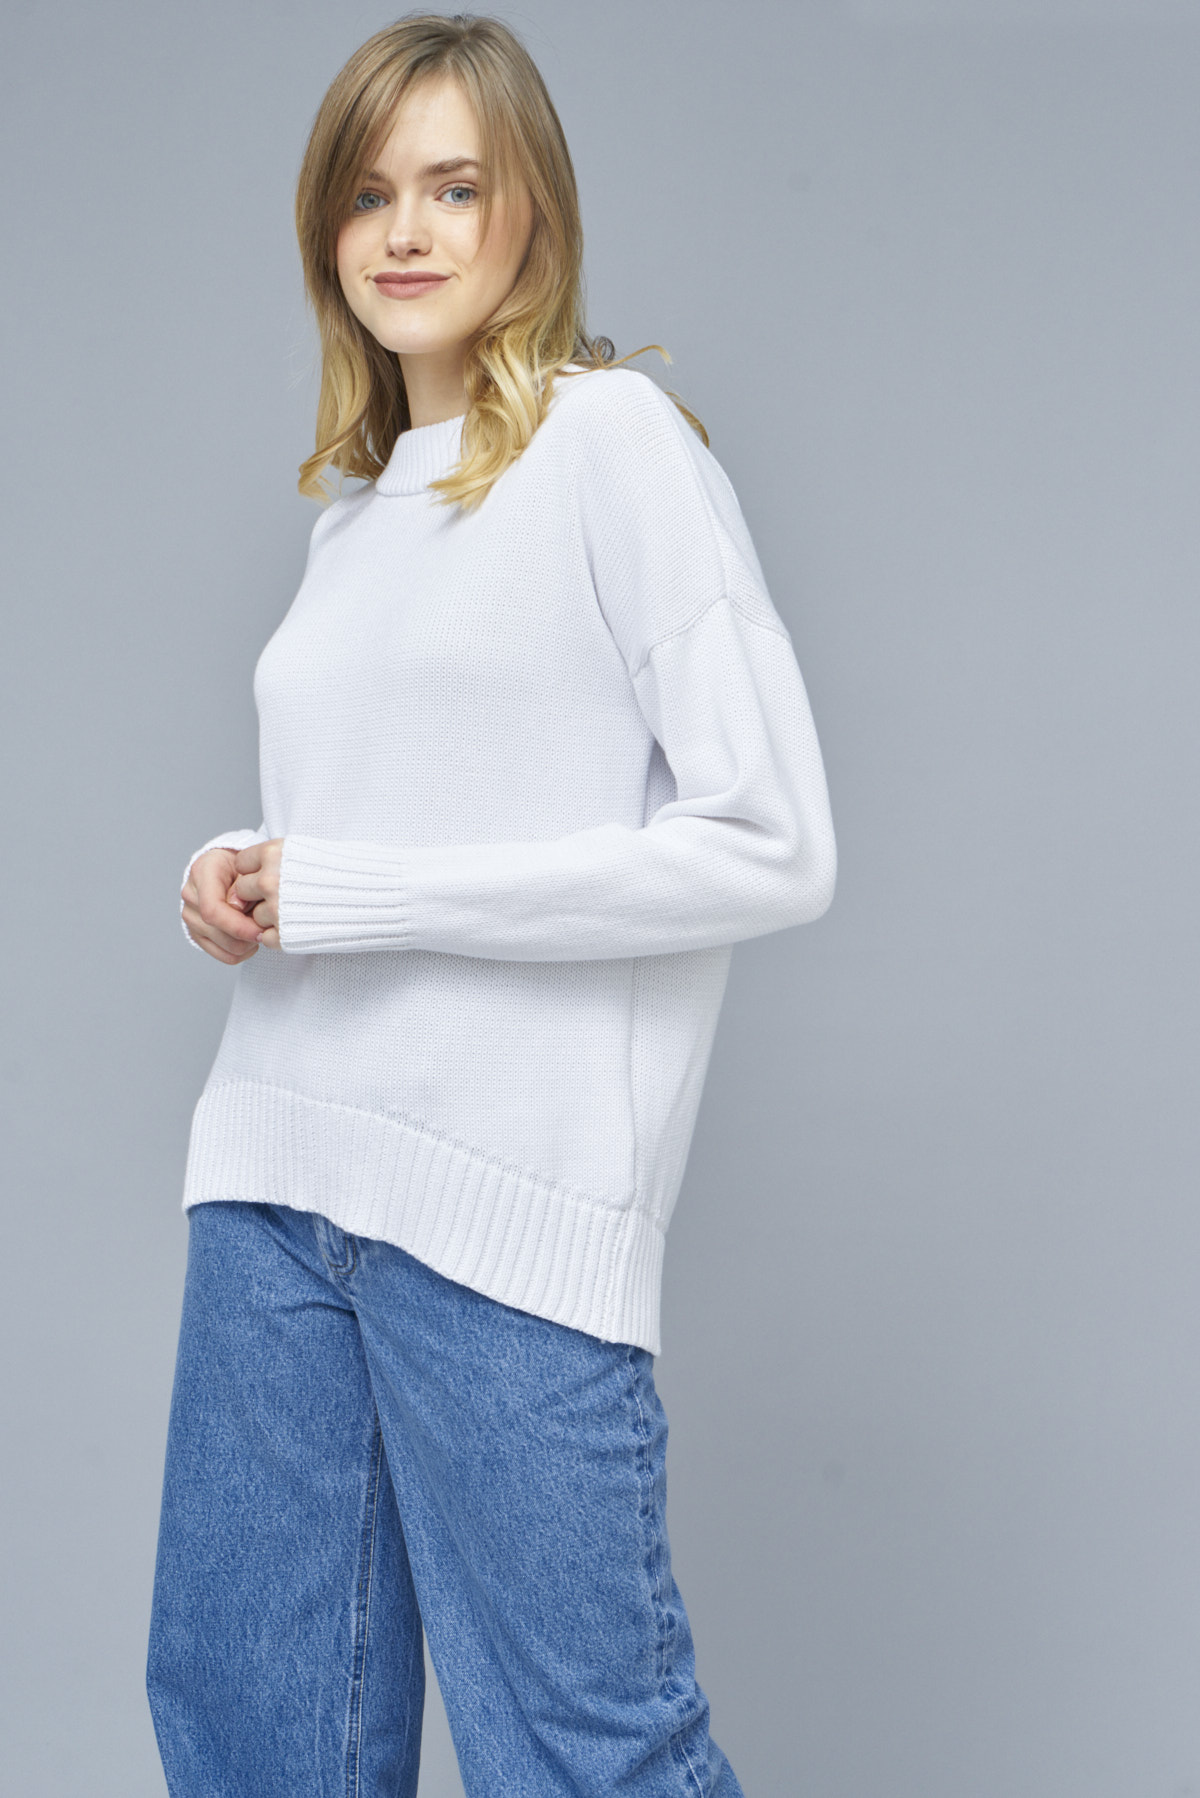 White knitted cotton sweater, photo 1